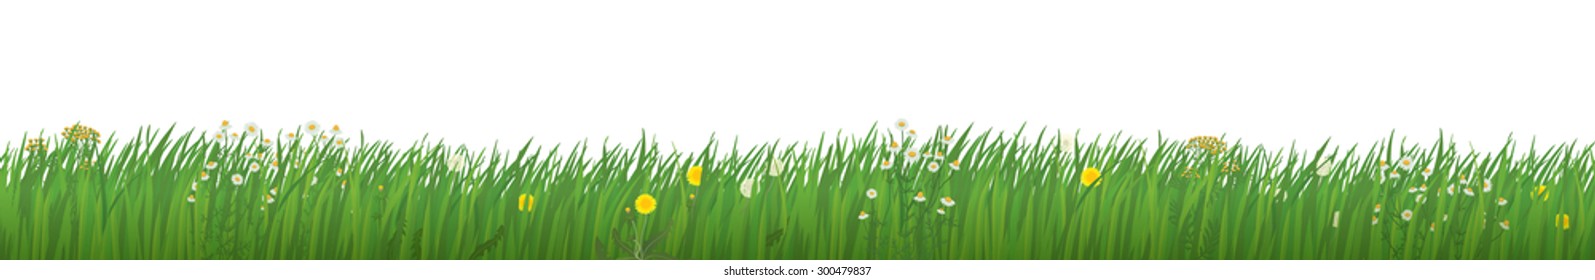 Grass with Flowers